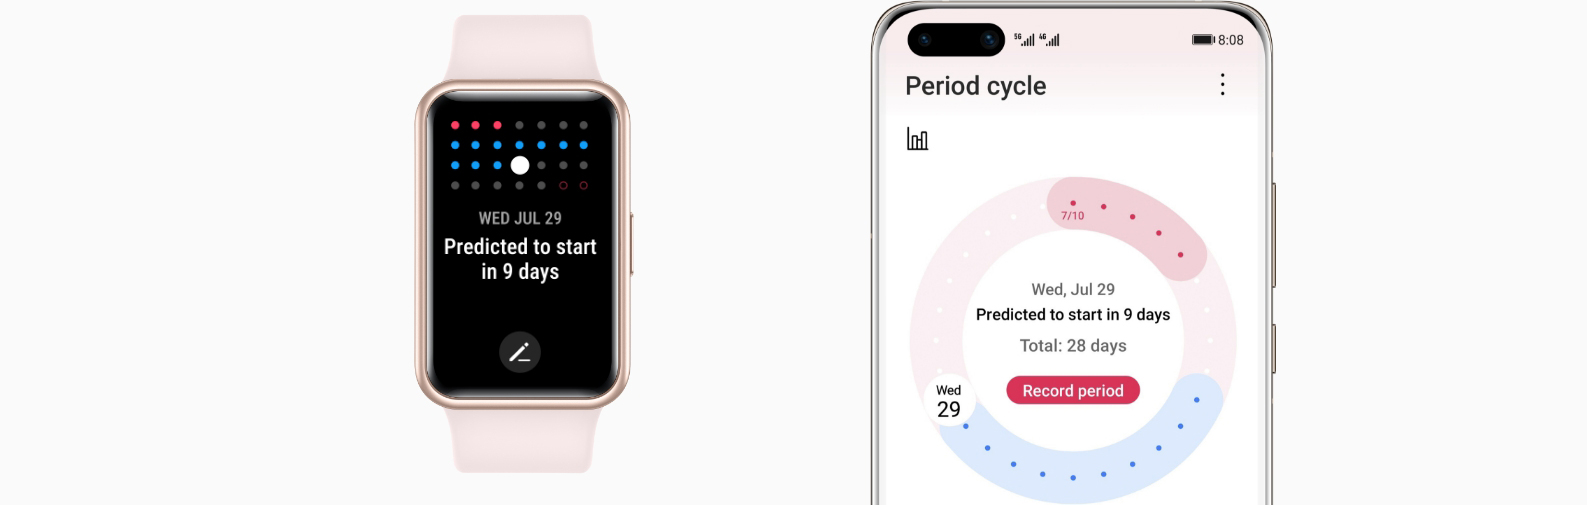 huawei watch fit-menstruation cycle tracking